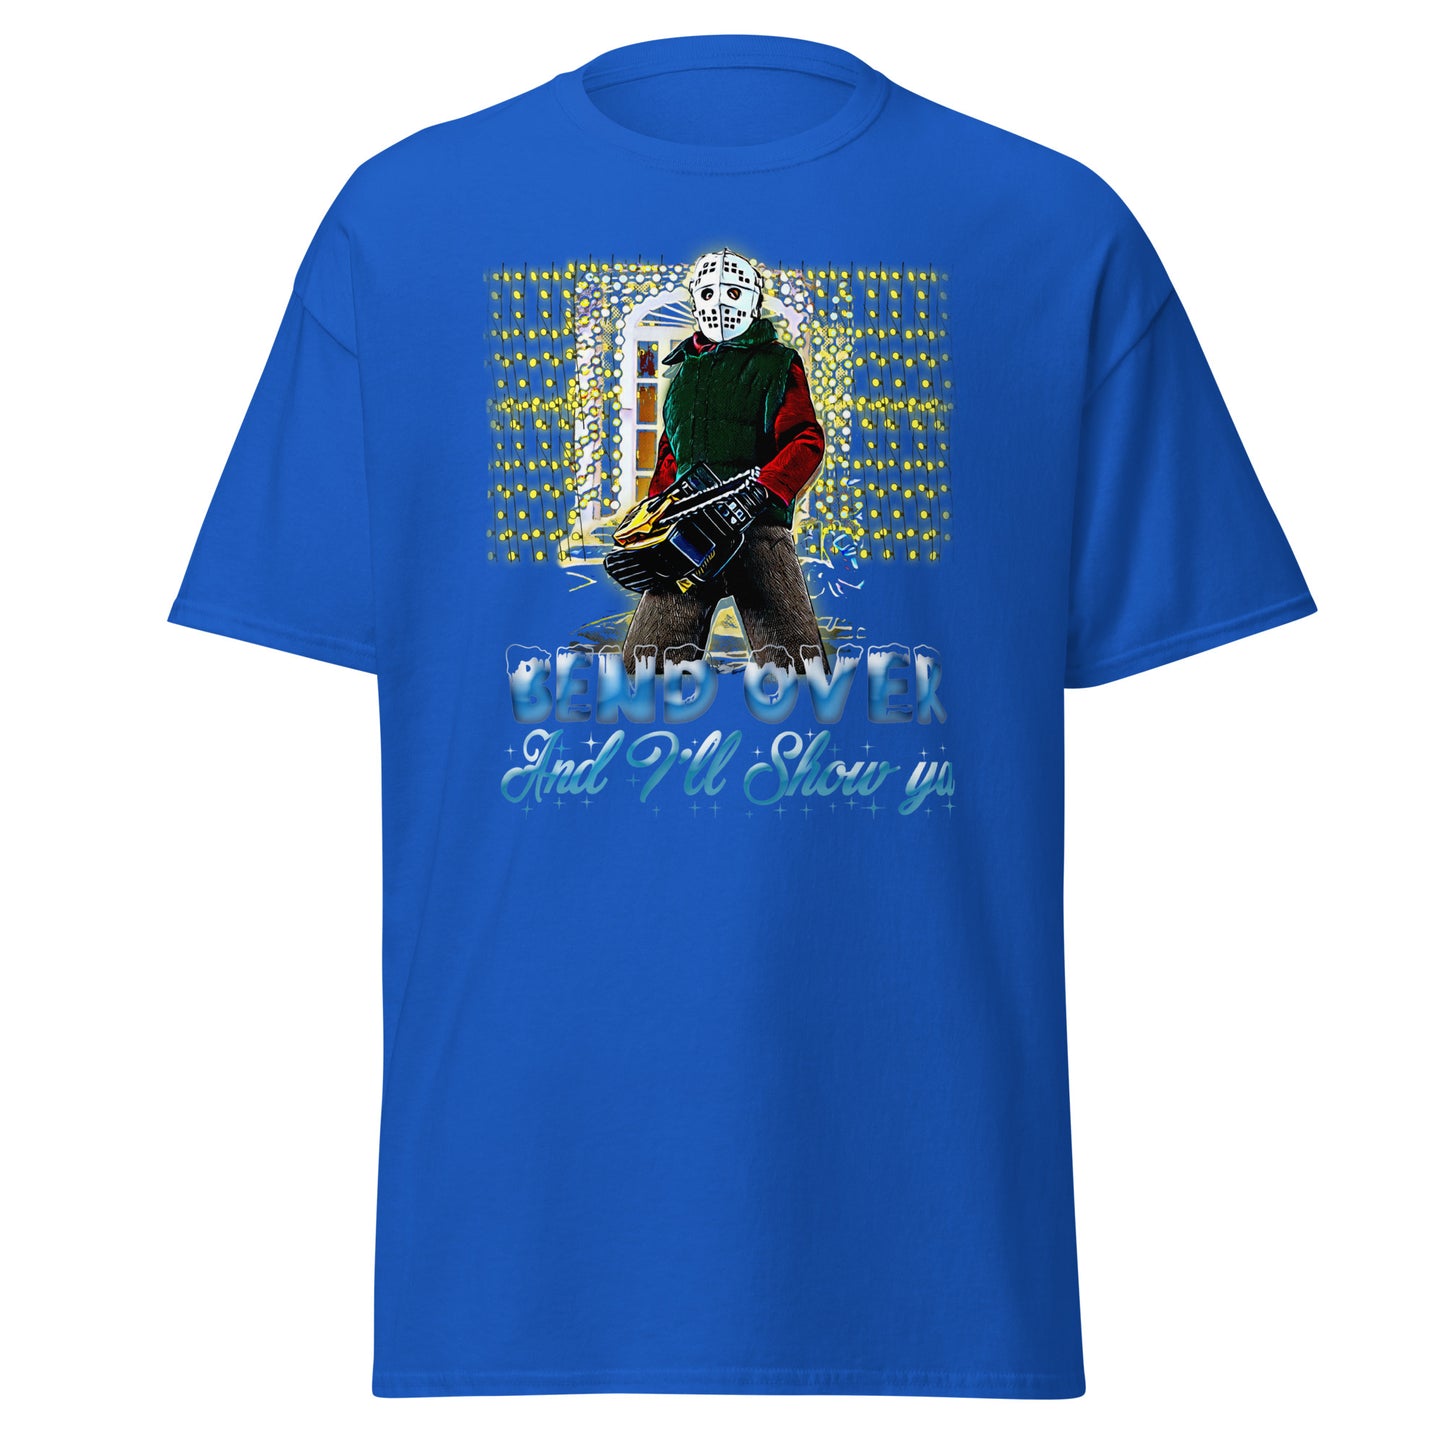 Christmas Vacation T-Shirts - Clark Griswold Quote Shirts - Blue